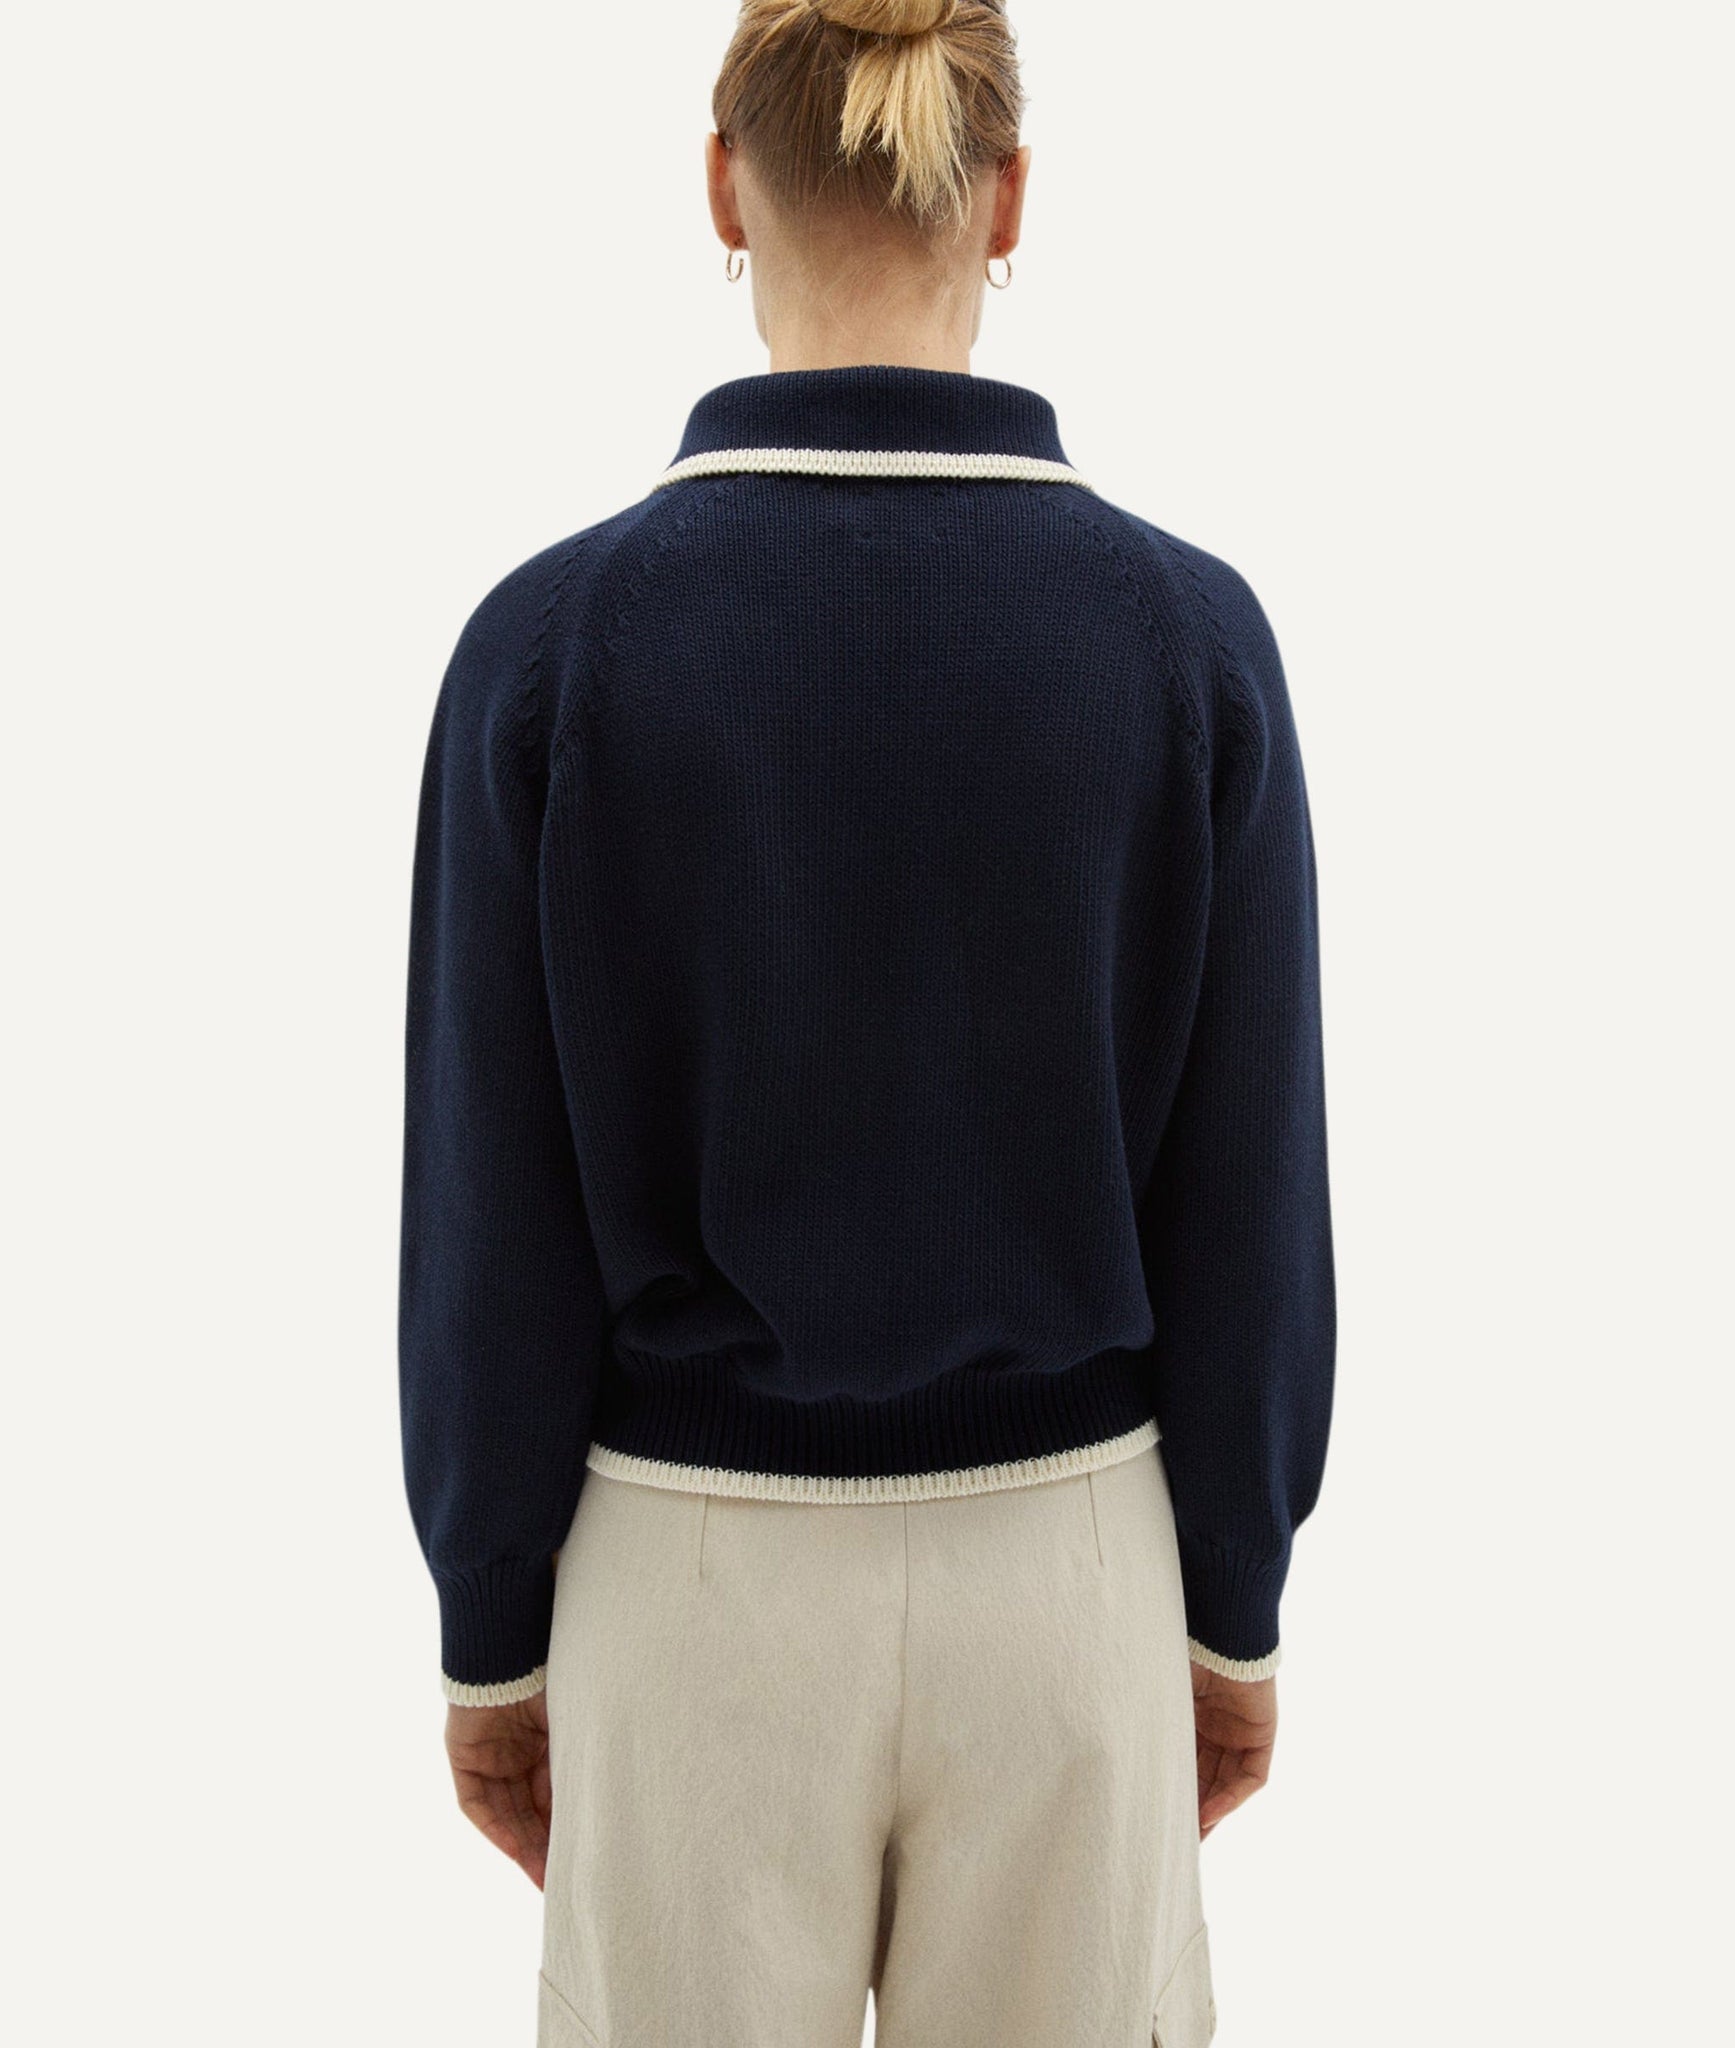 The Organic Cotton Tricot jacket